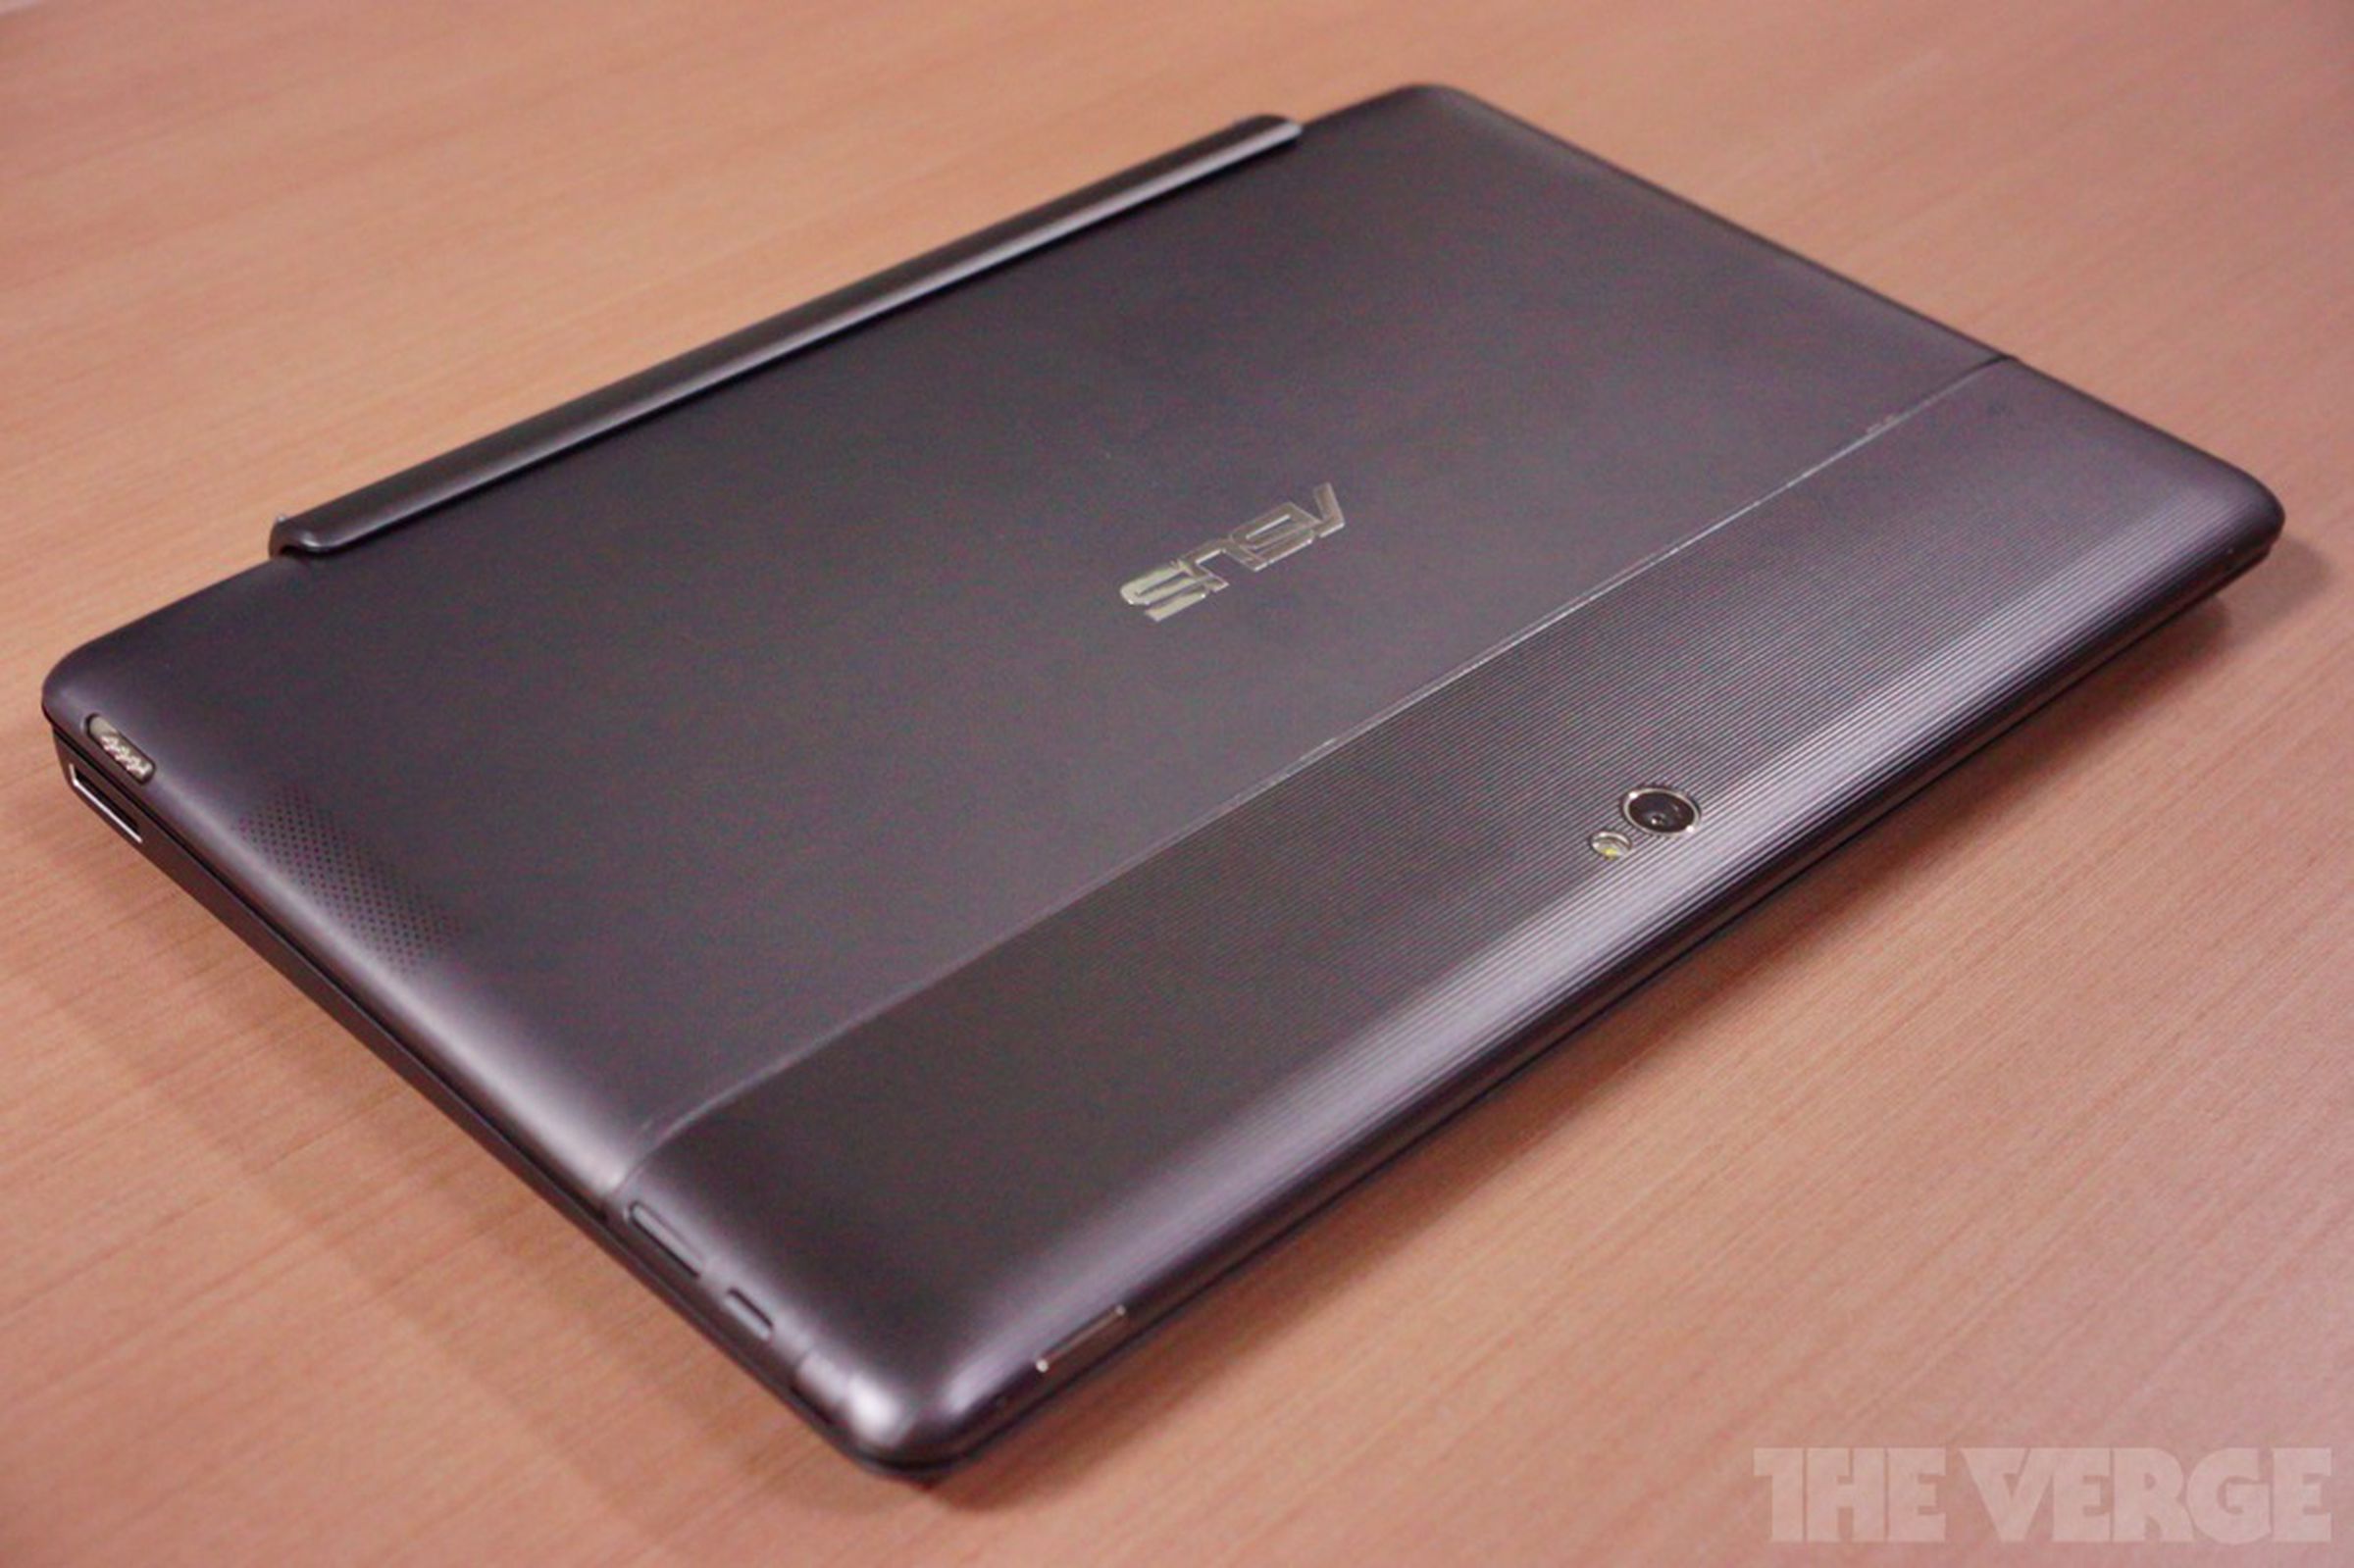 Asus Tablet 600 hands-on photos